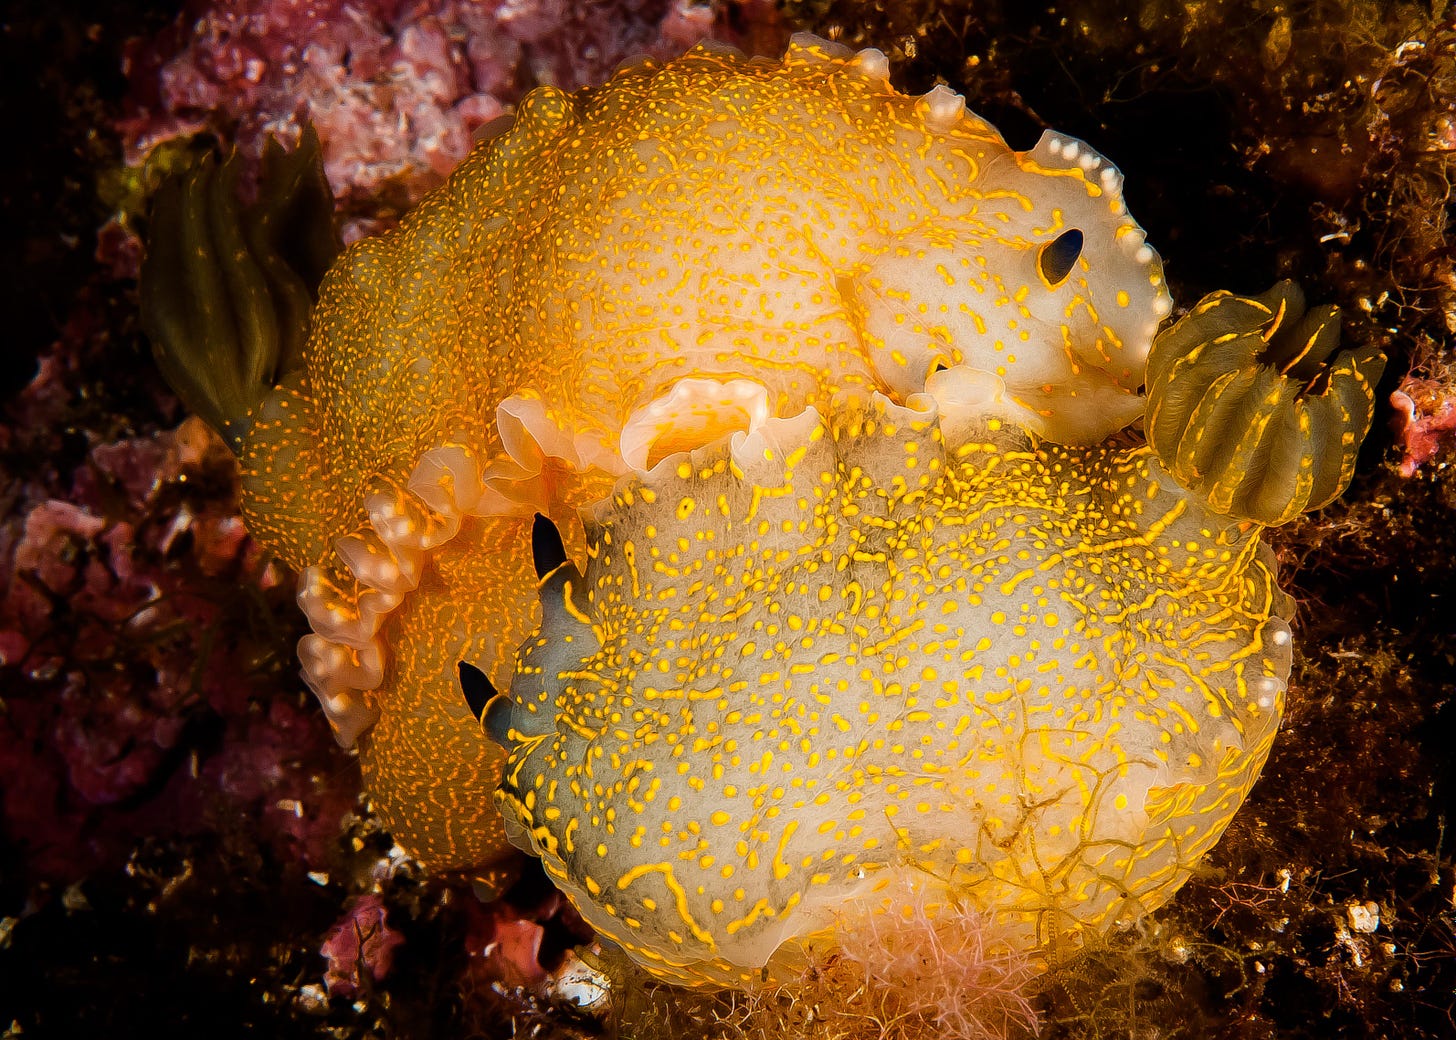 Felimare picta (mating) nudibranch